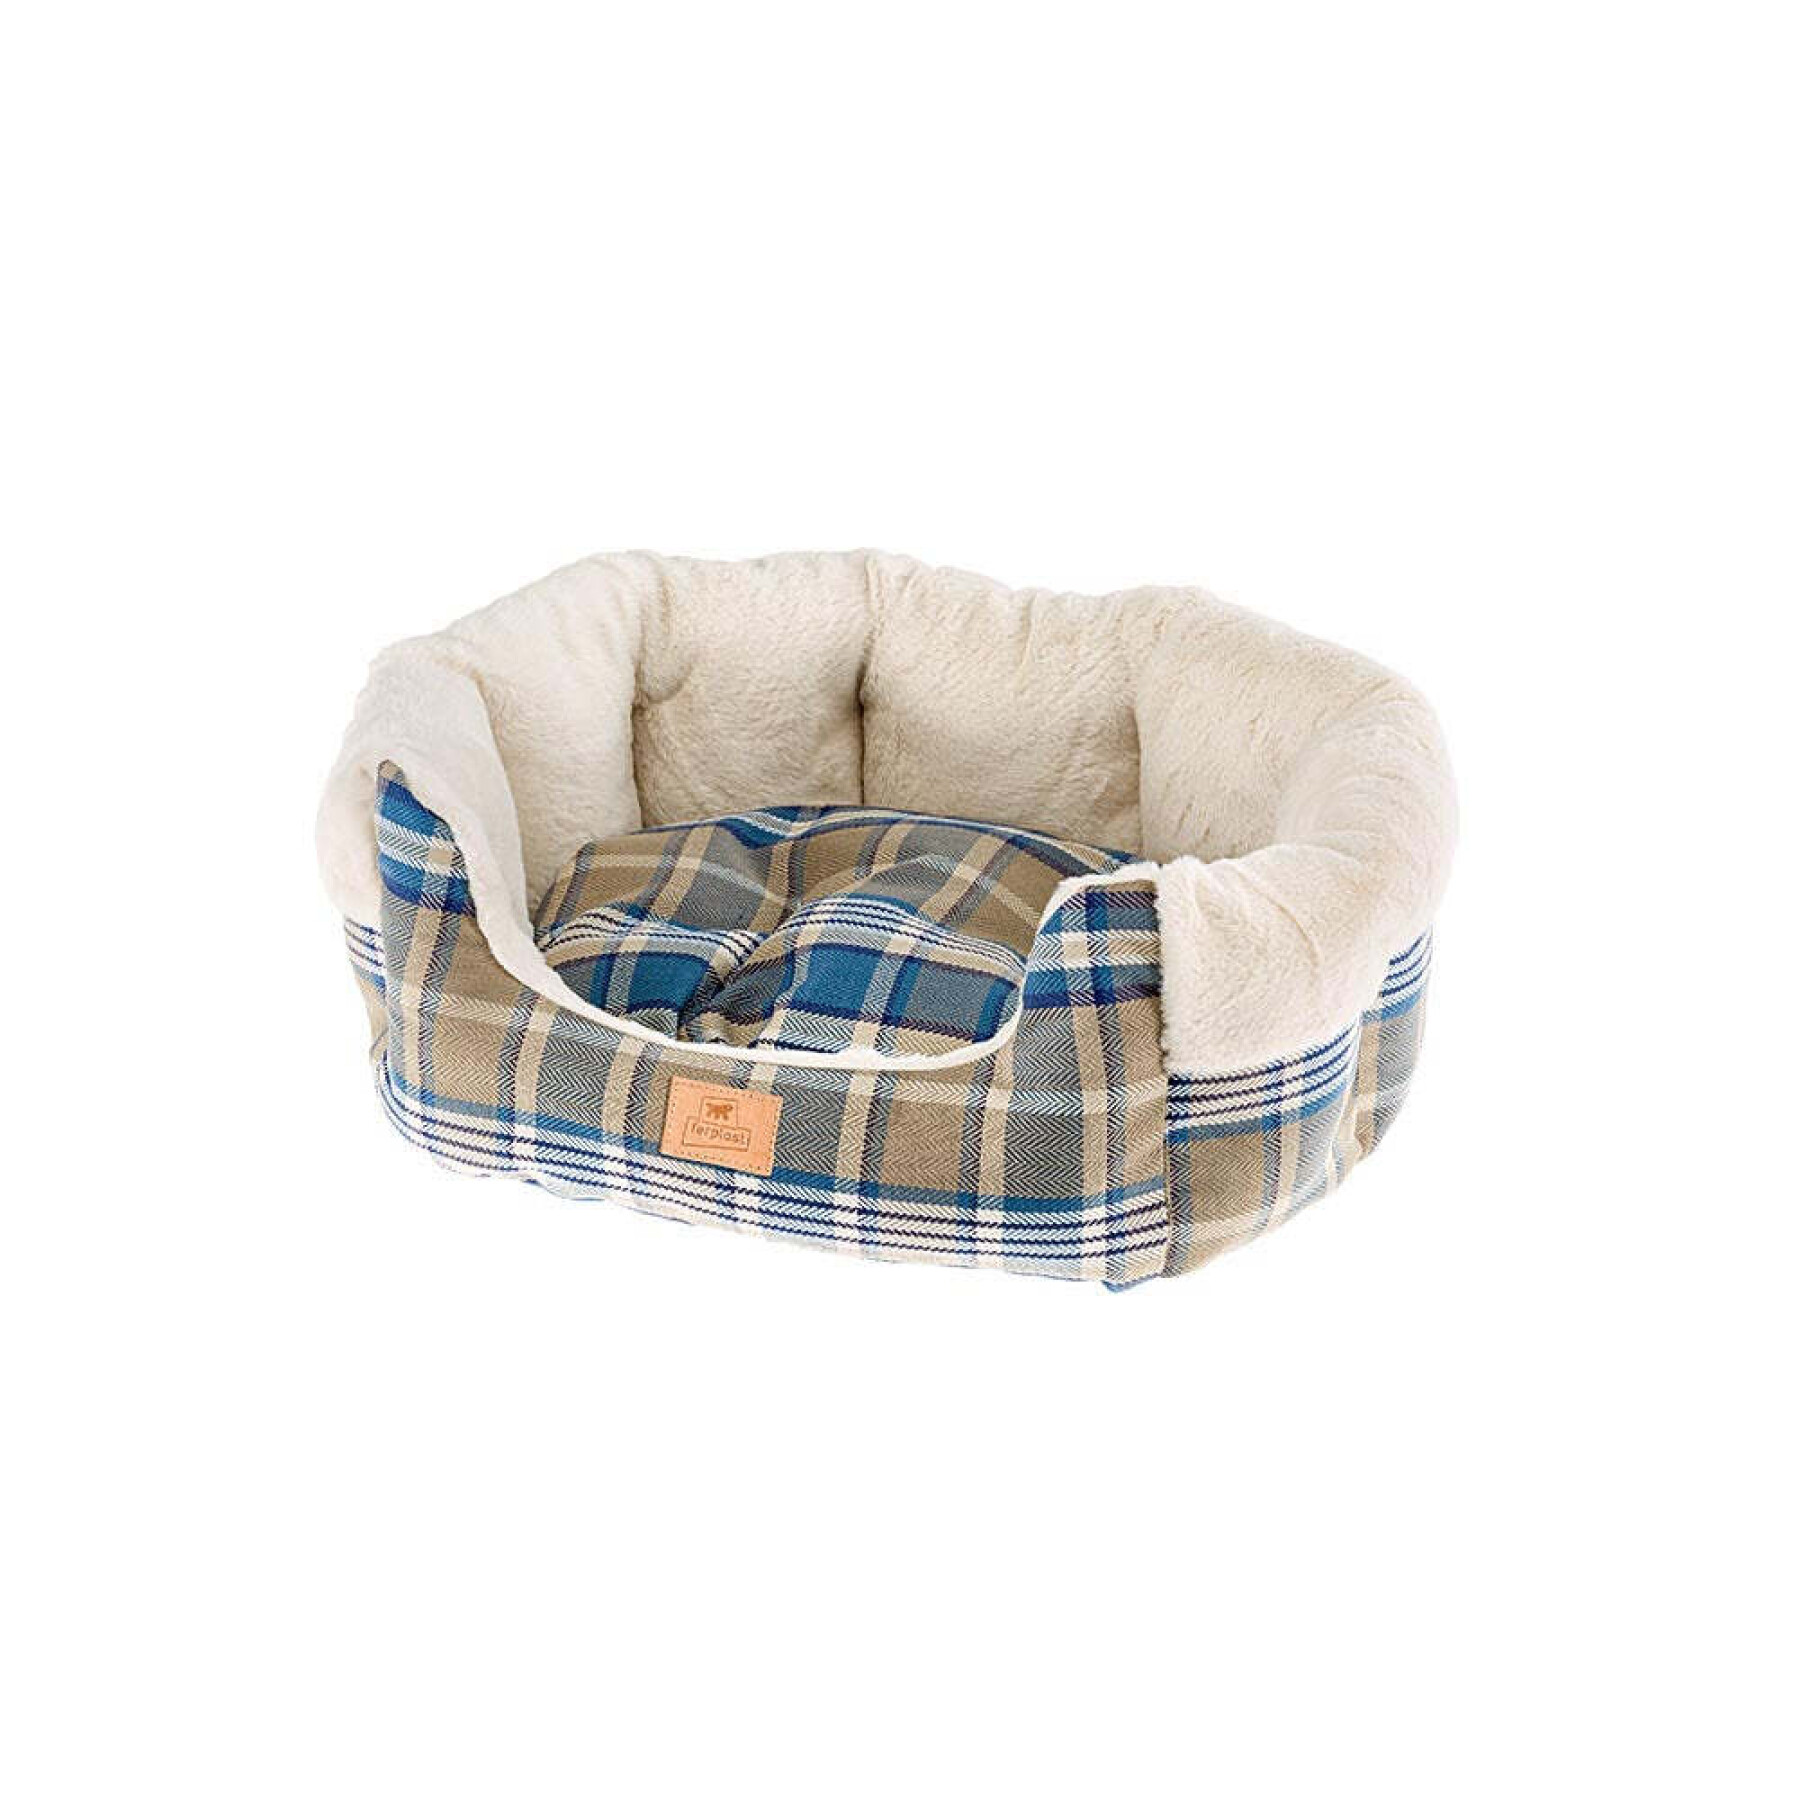 Basket for dogs and cats Ferplast Etoile 6